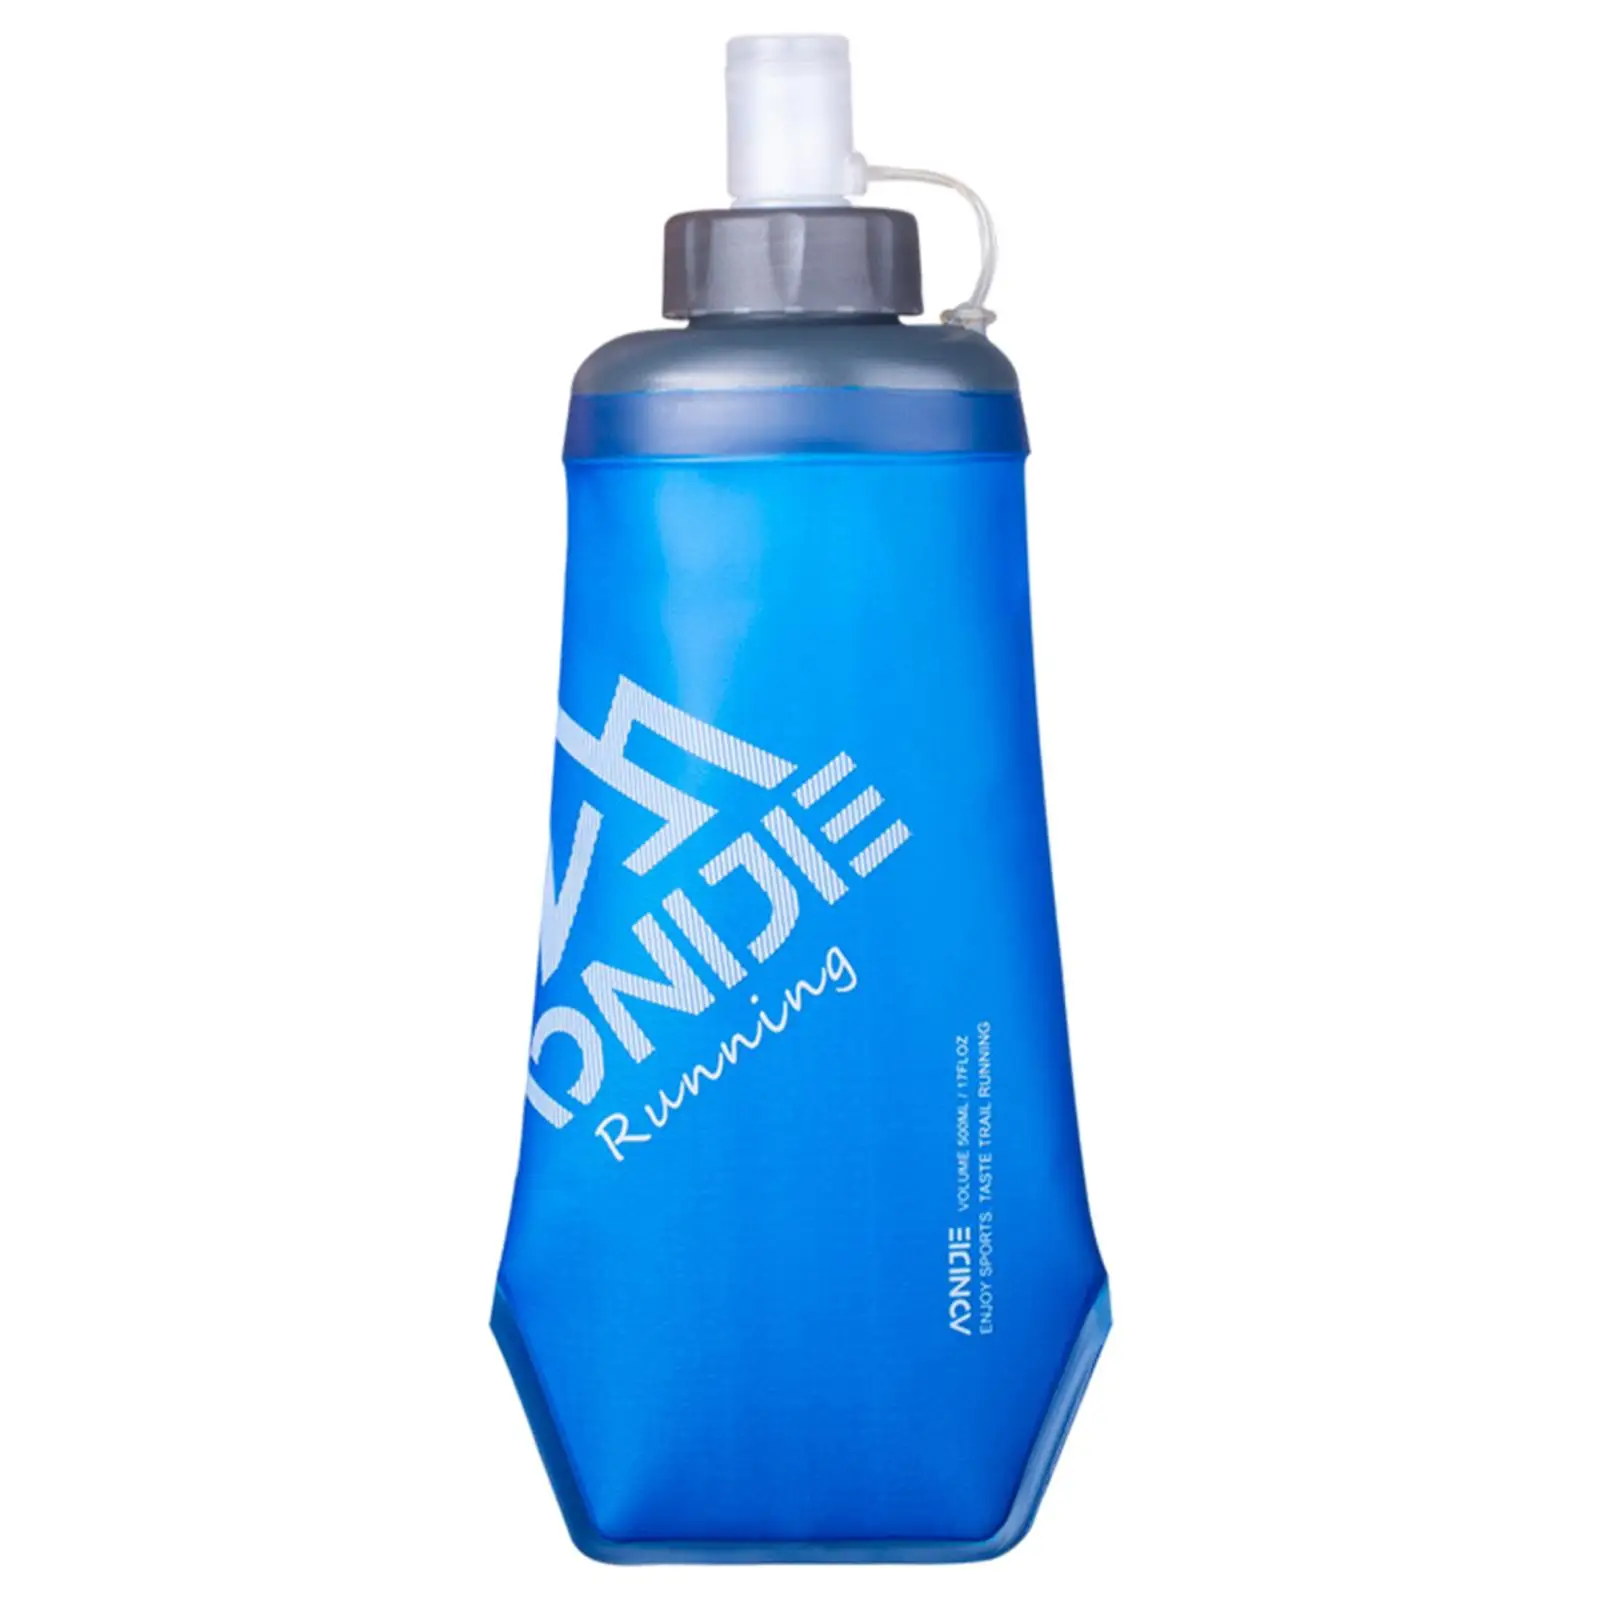 Collapsible Water Bottle   Reservoir  Flask Storage Bag Bladder for Bike Cycling  Camping